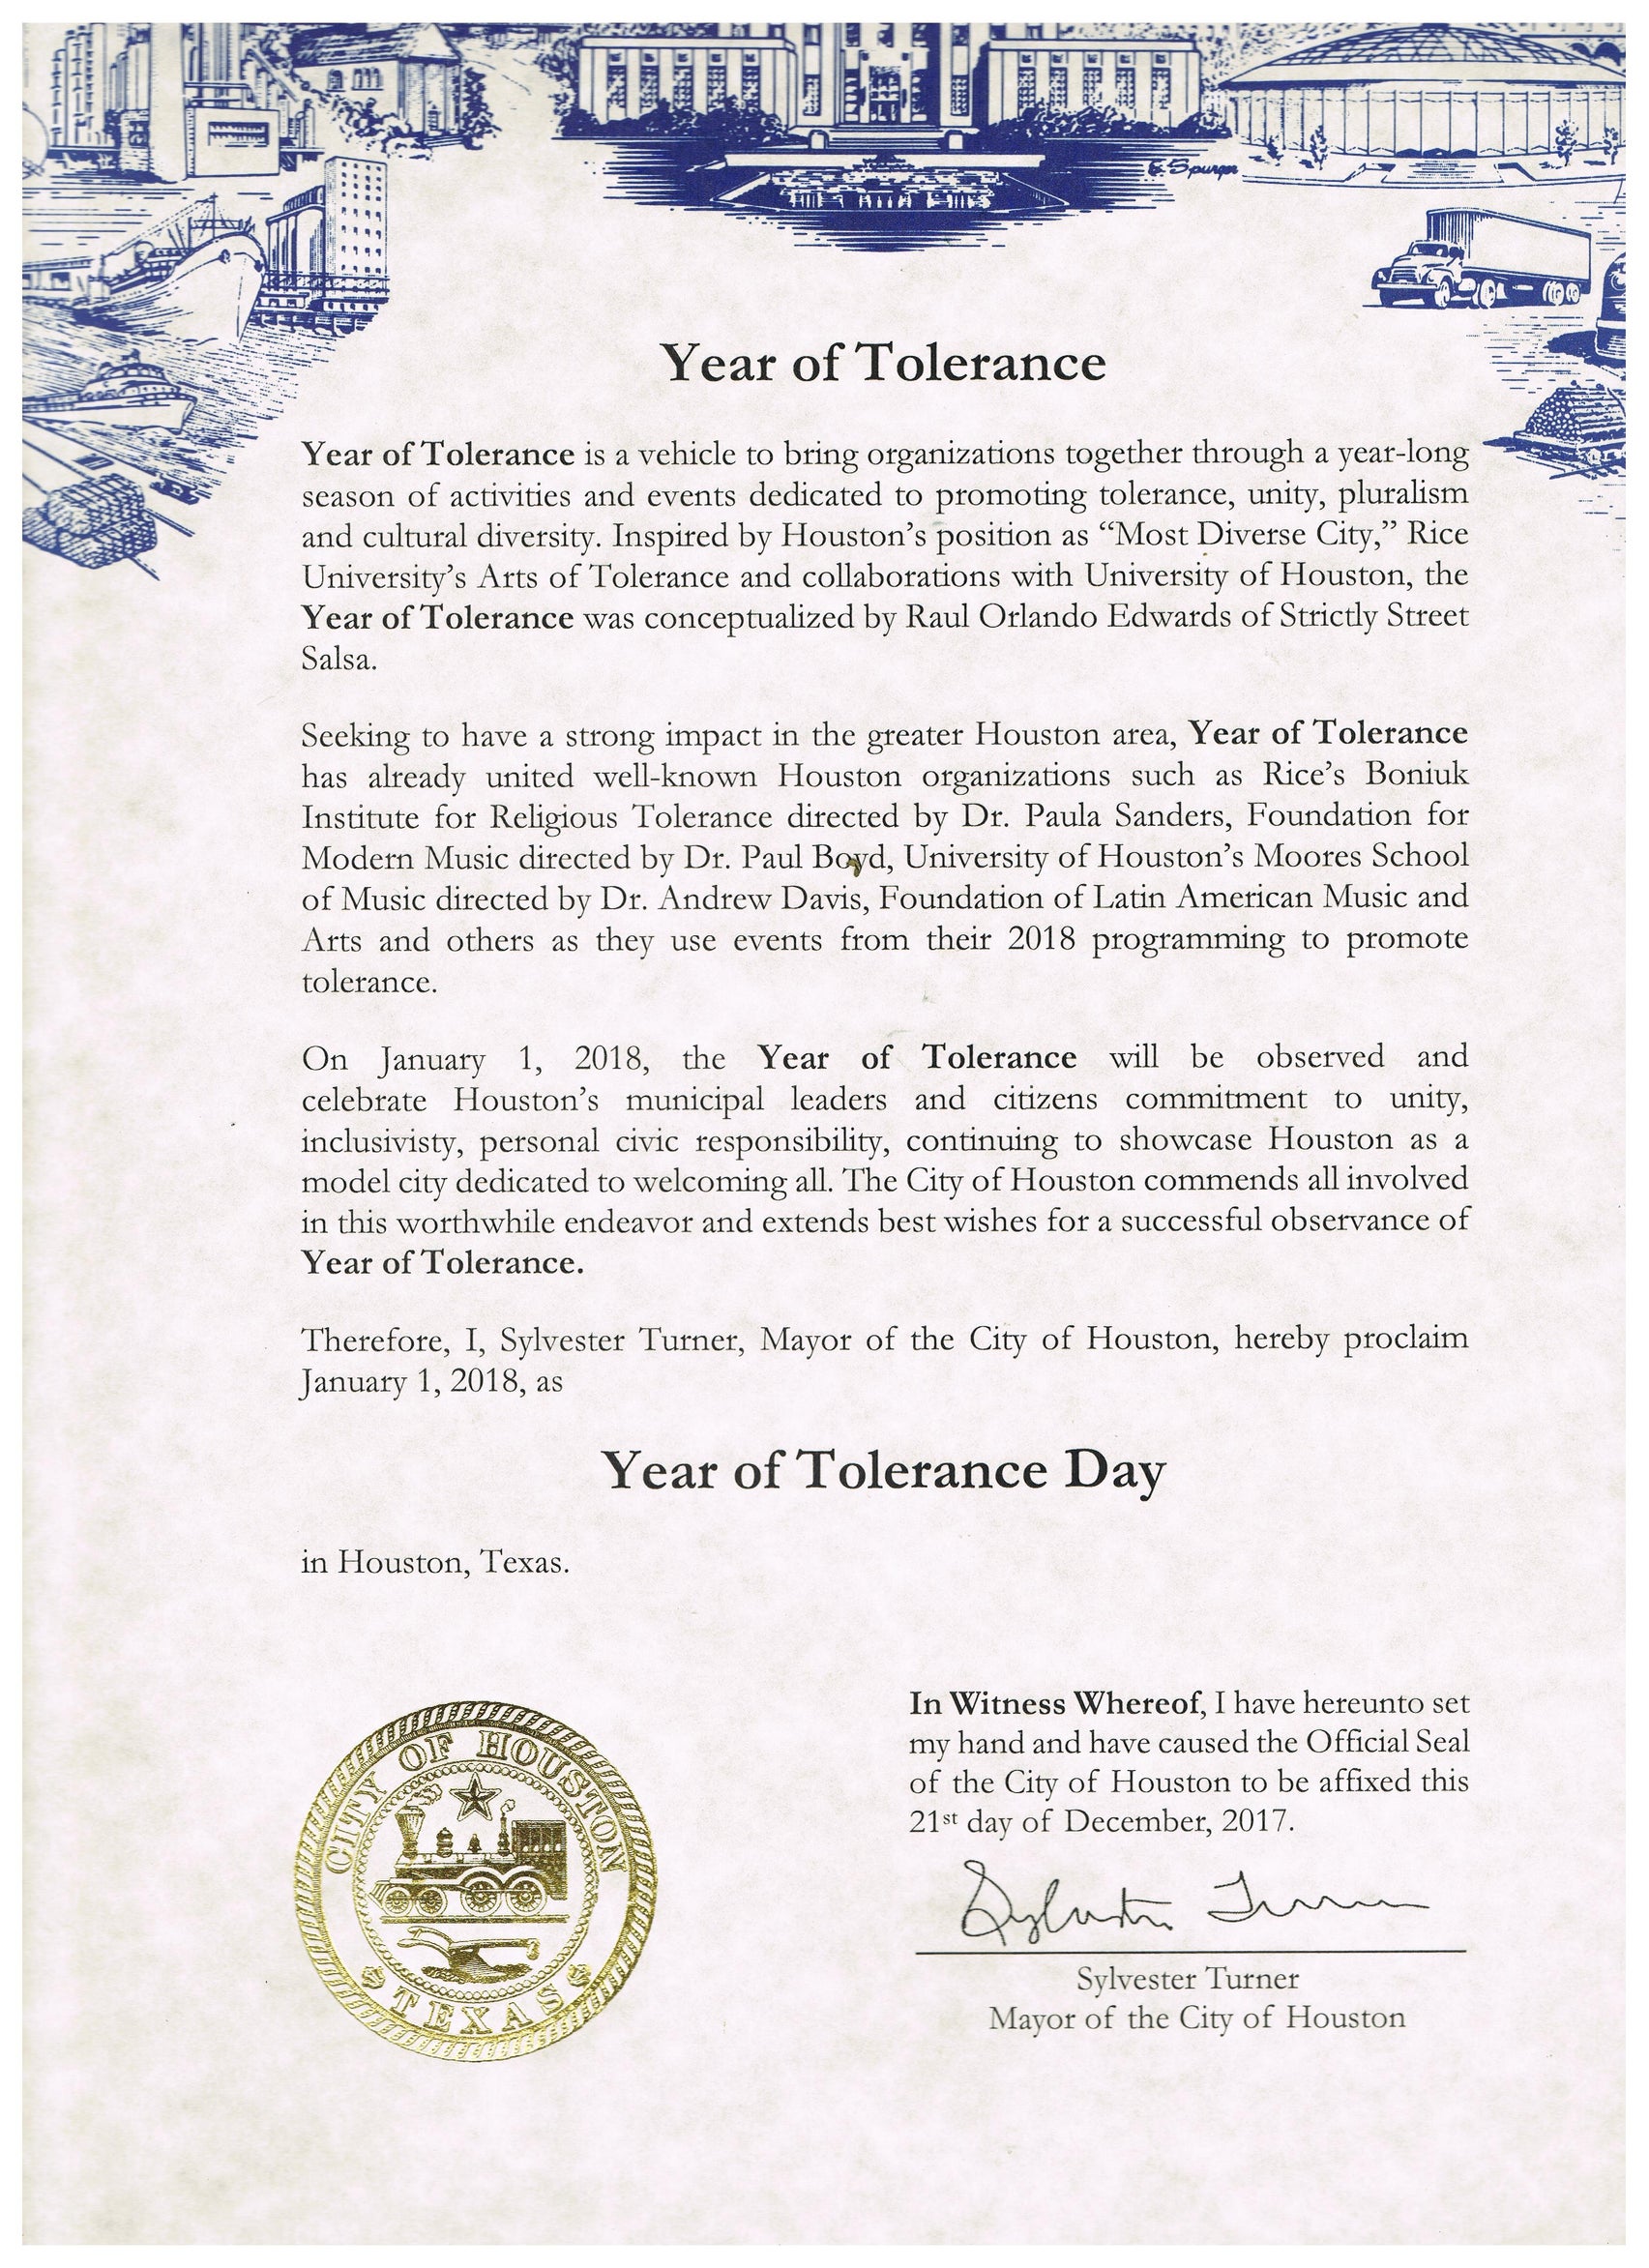 COH Year of Tolerance resolution